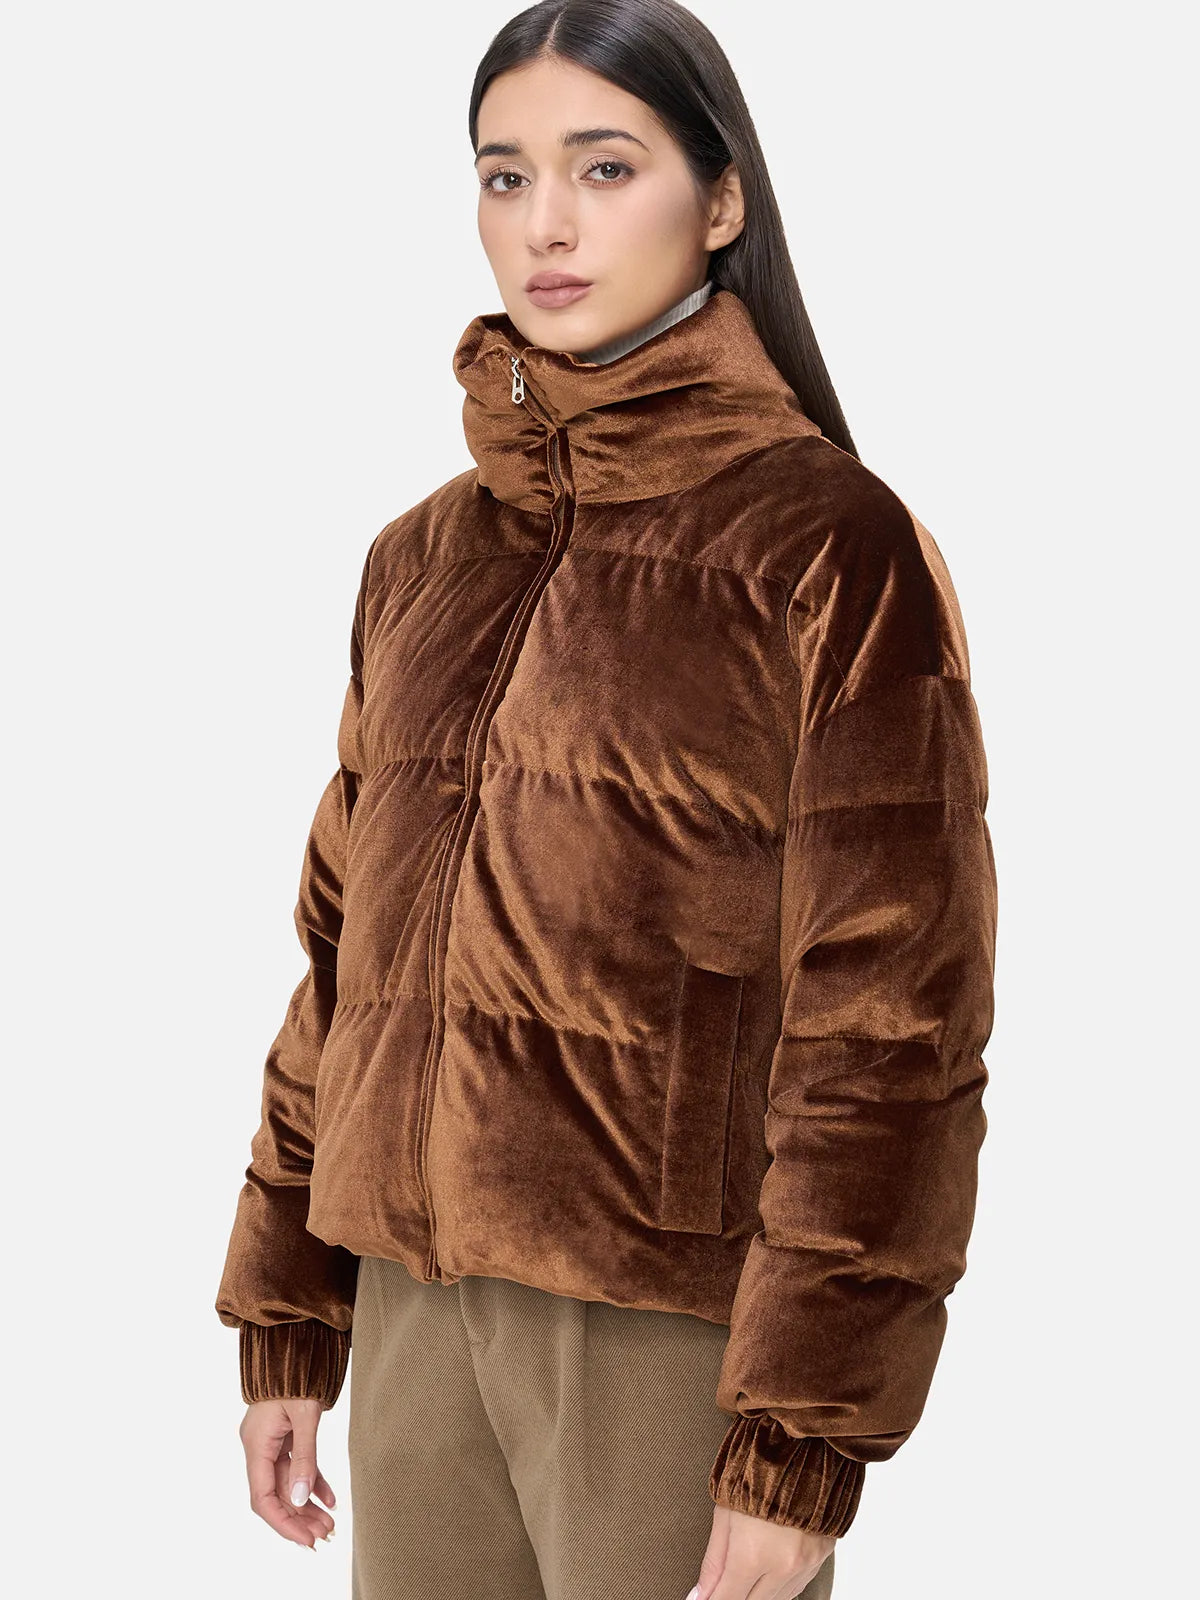 Stand Collar Goose Down Coat: Stylish Warmth for Cold Seasons